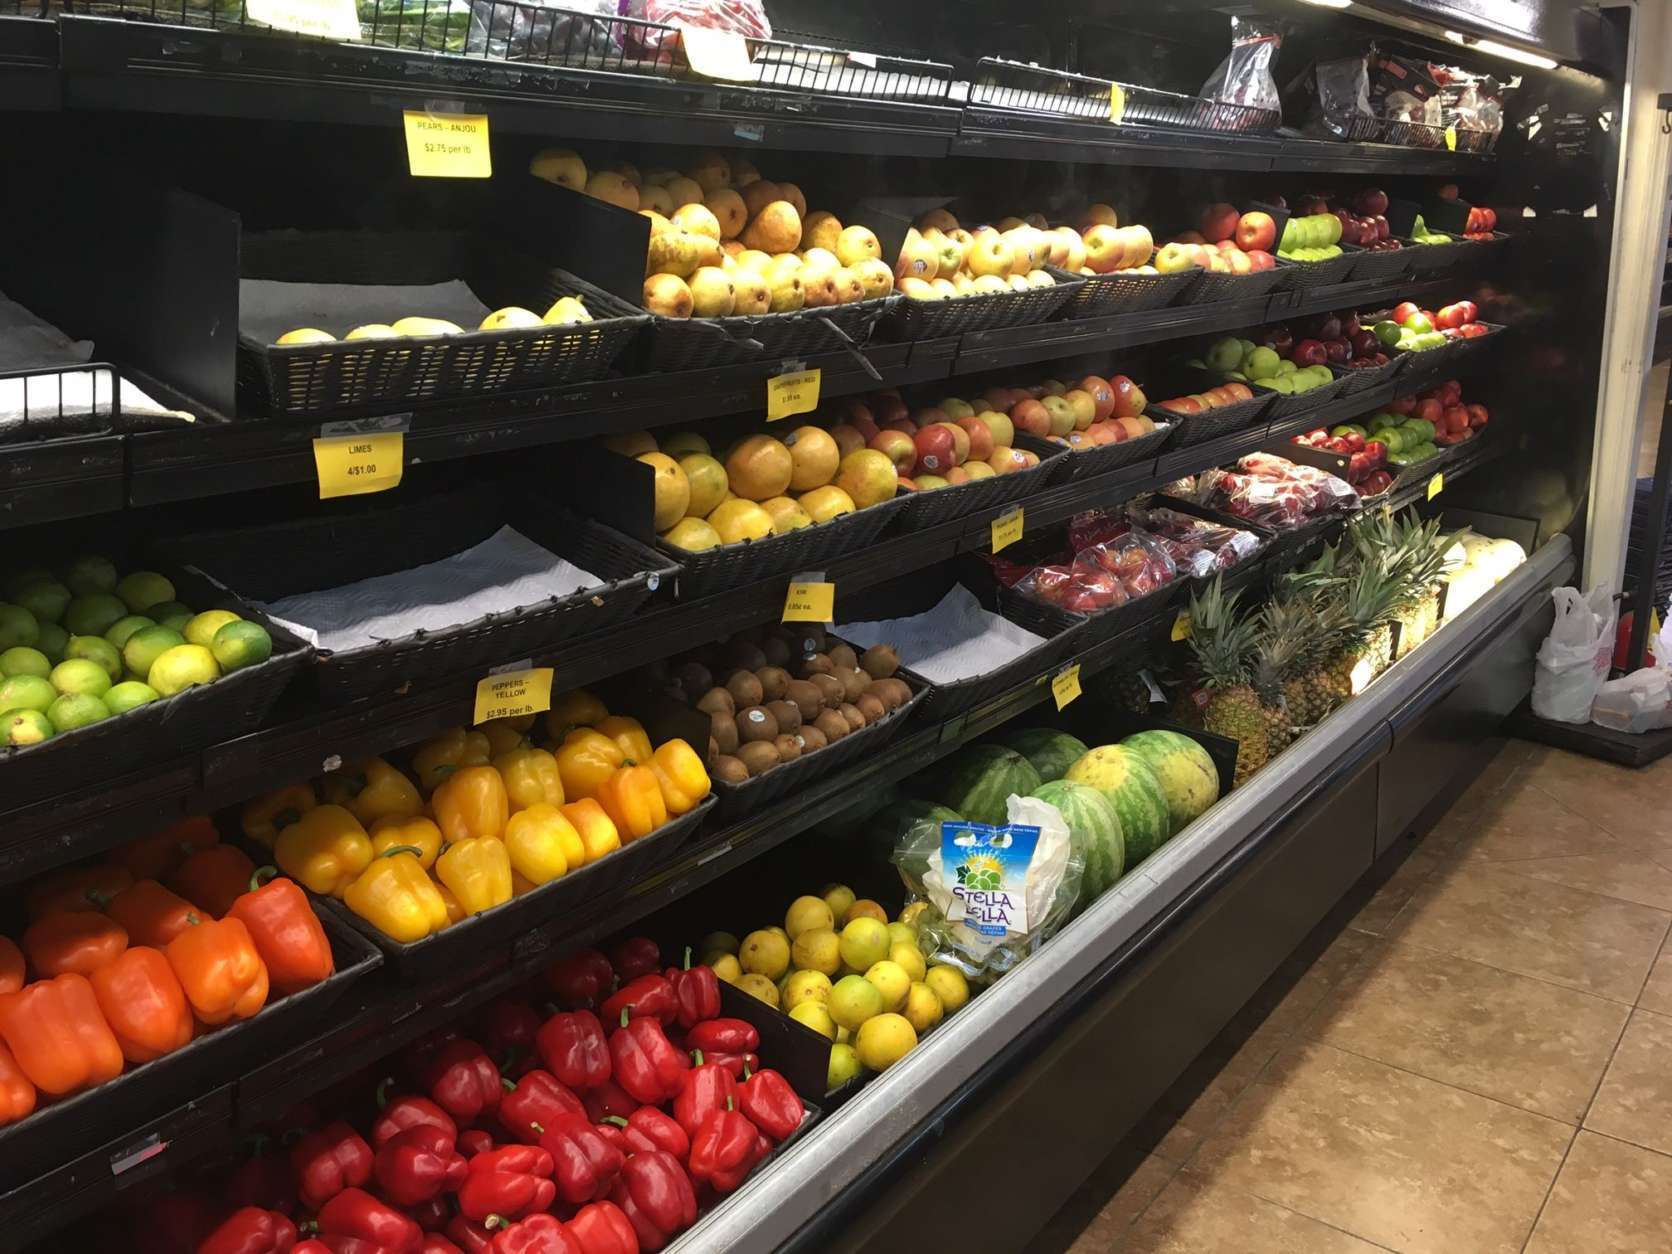 St. John's grocery stores are well-stocked with fresh produce. (WTOP/Jeff Clabaugh)